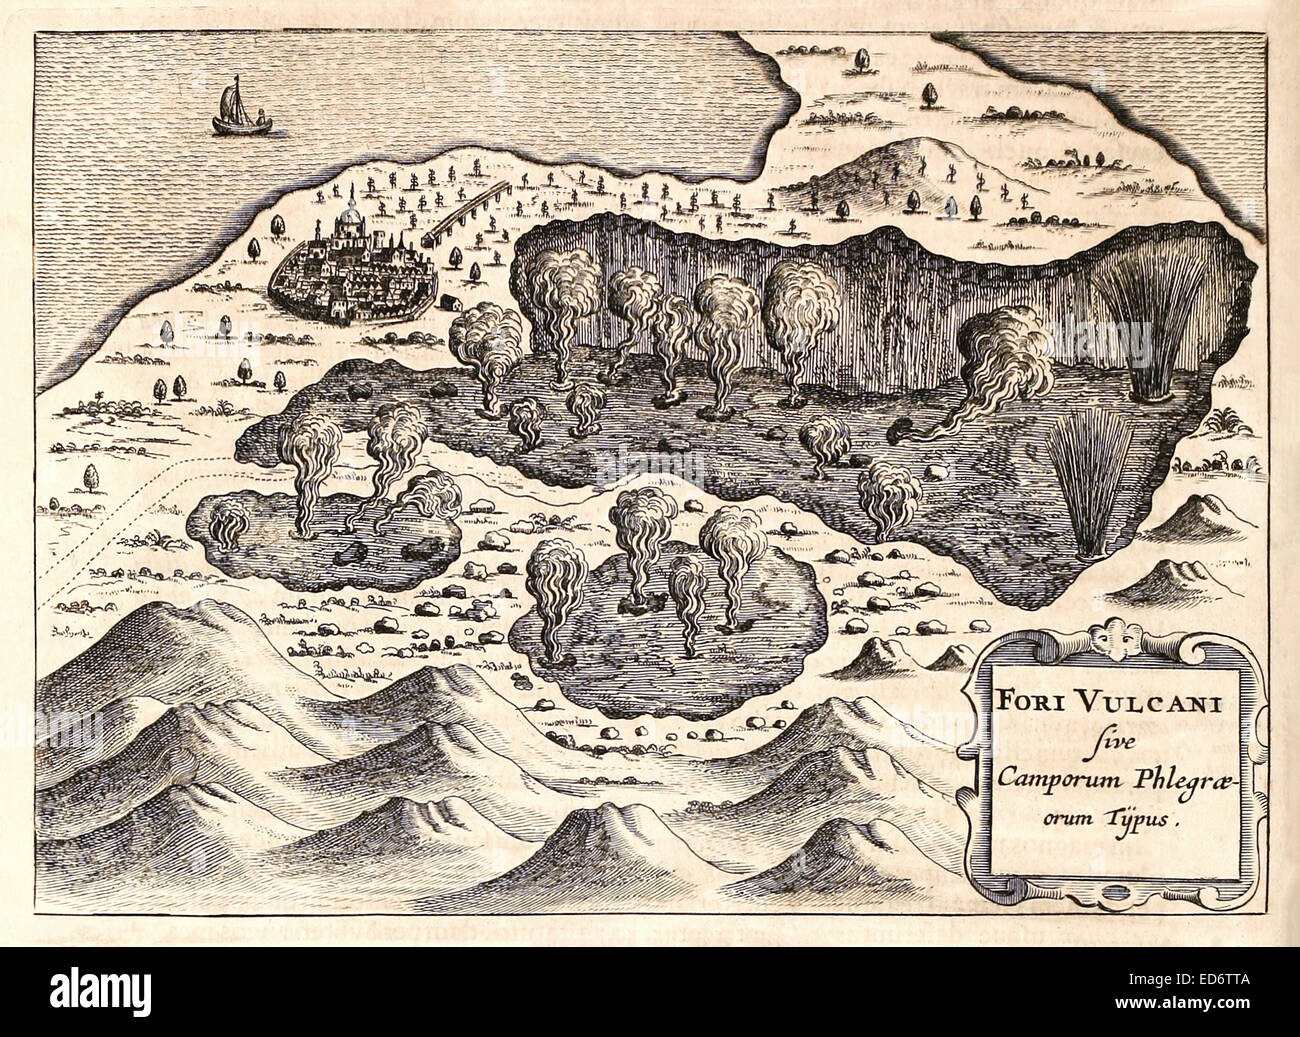 Fori Vulcani sive Camporum Phlegraeorum Typus' 17th century illustration  showing the Phlegraean Fields and the city of Pompeii. See description for  more information Stock Photo - Alamy